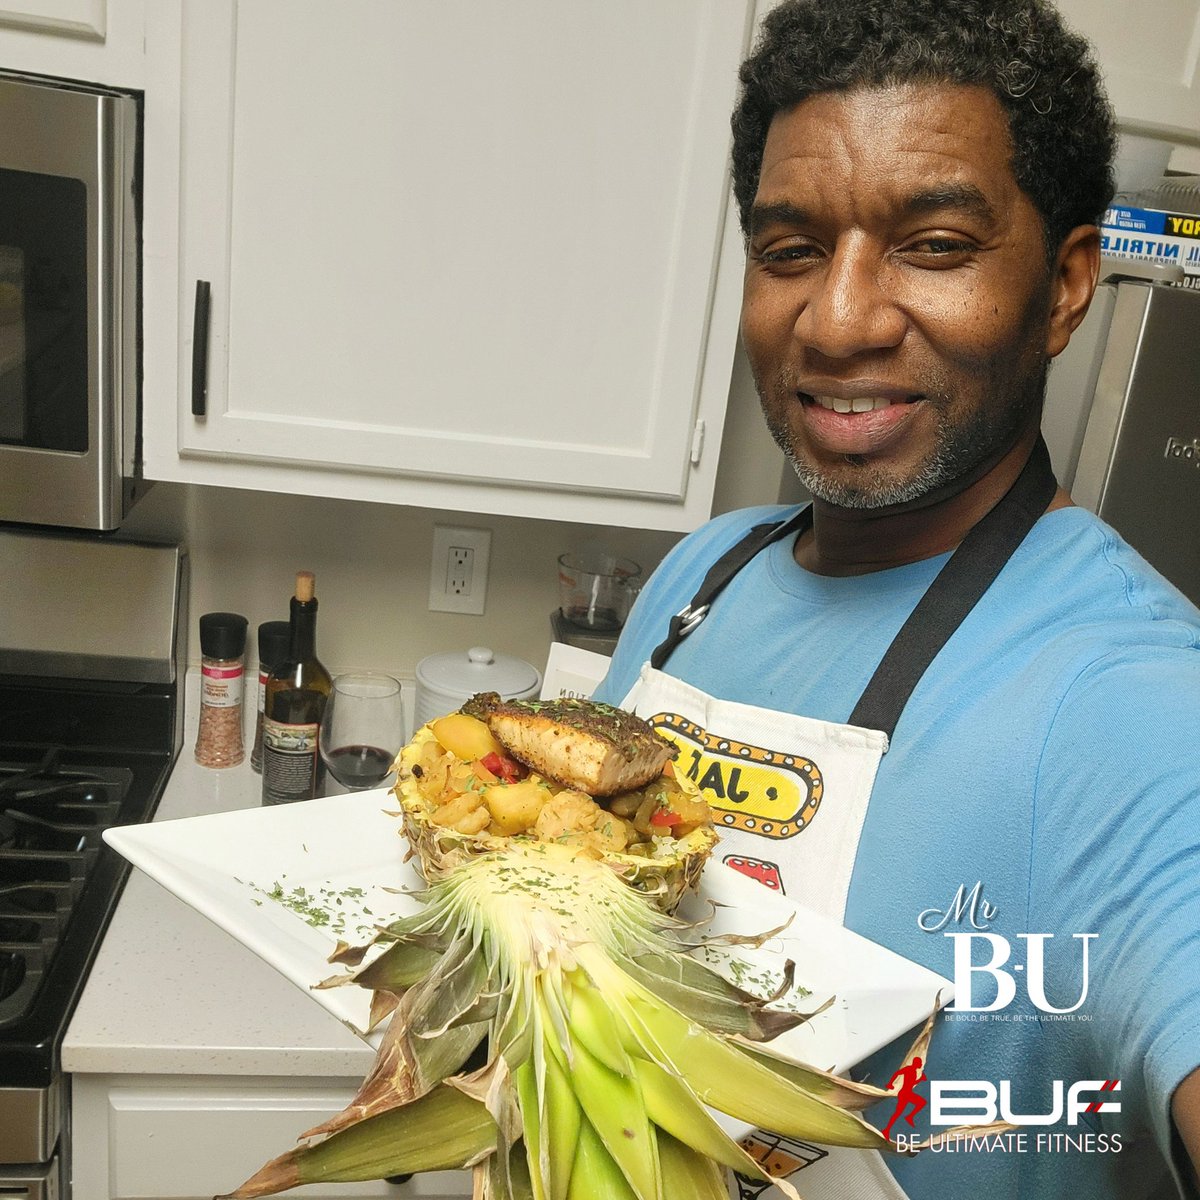 Home cooking ~Dr B-U 

#hecooks #gourmetflavors #dinnerisserved 
#beultimatecuisine #DRBU #mrbeultimate #hecooks #homemade #dinnerideas #salmon #MrBUCooks4U #blackmen #kitchenmagic #castironcooking #menwhocook  #blackmenwhocook #foodie #fancyfood #foodphotography